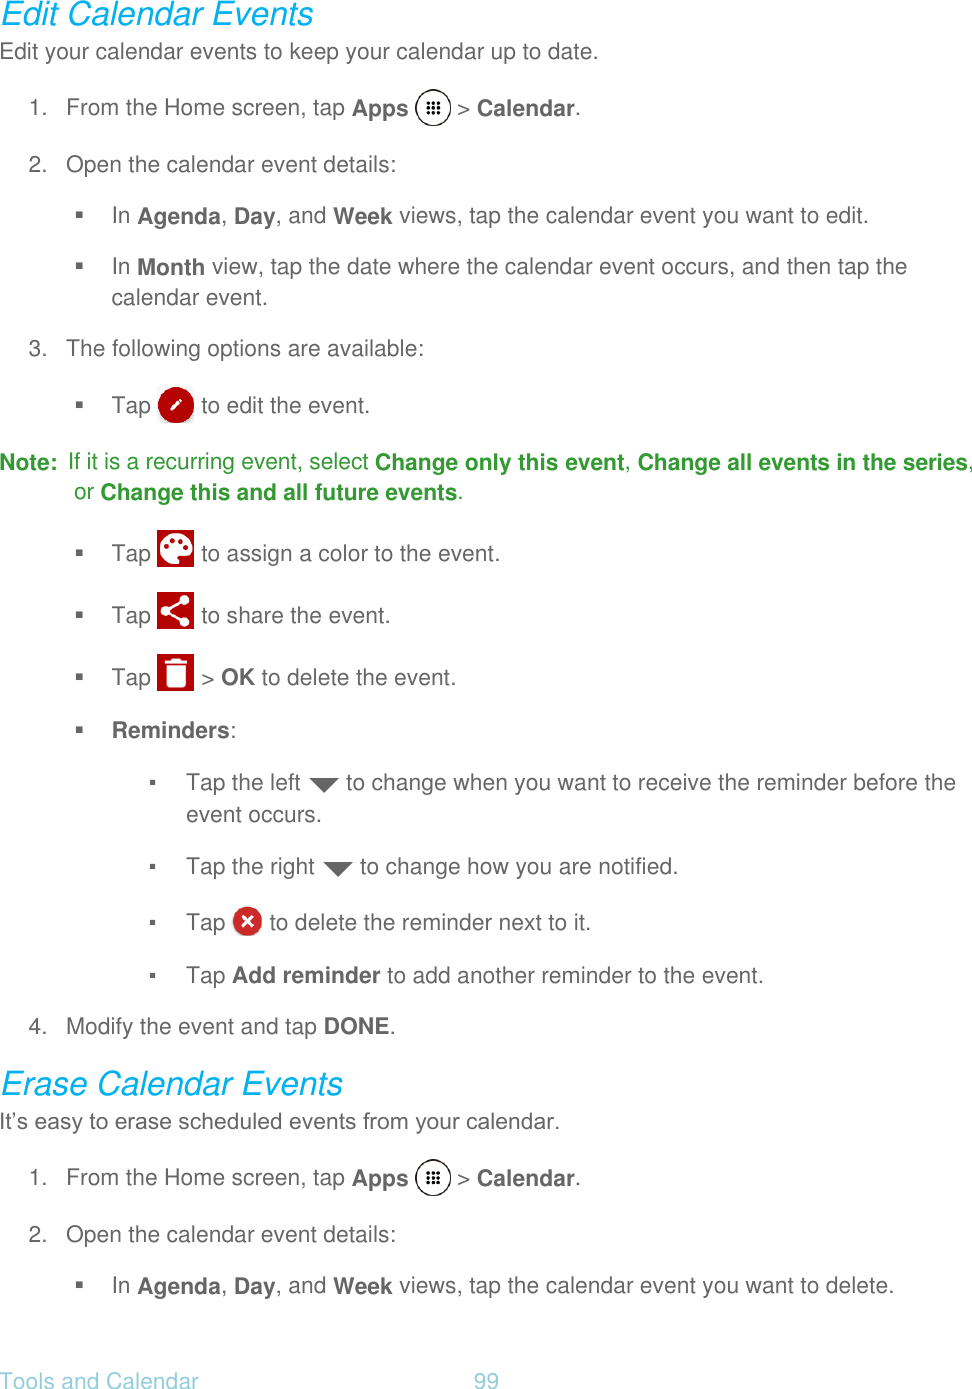 Tools and Calendar  99   Edit Calendar Events Edit your calendar events to keep your calendar up to date. 1.  From the Home screen, tap Apps   &gt; Calendar. 2.  Open the calendar event details:  In Agenda, Day, and Week views, tap the calendar event you want to edit.  In Month view, tap the date where the calendar event occurs, and then tap the calendar event. 3.  The following options are available:  Tap   to edit the event. Note:  If it is a recurring event, select Change only this event, Change all events in the series, or Change this and all future events.  Tap   to assign a color to the event.  Tap   to share the event.  Tap   &gt; OK to delete the event.  Reminders: ▪ Tap the left   to change when you want to receive the reminder before the event occurs. ▪ Tap the right   to change how you are notified. ▪ Tap   to delete the reminder next to it. ▪ Tap Add reminder to add another reminder to the event. 4.  Modify the event and tap DONE. Erase Calendar Events It’s easy to erase scheduled events from your calendar. 1.  From the Home screen, tap Apps   &gt; Calendar. 2.  Open the calendar event details:  In Agenda, Day, and Week views, tap the calendar event you want to delete. 